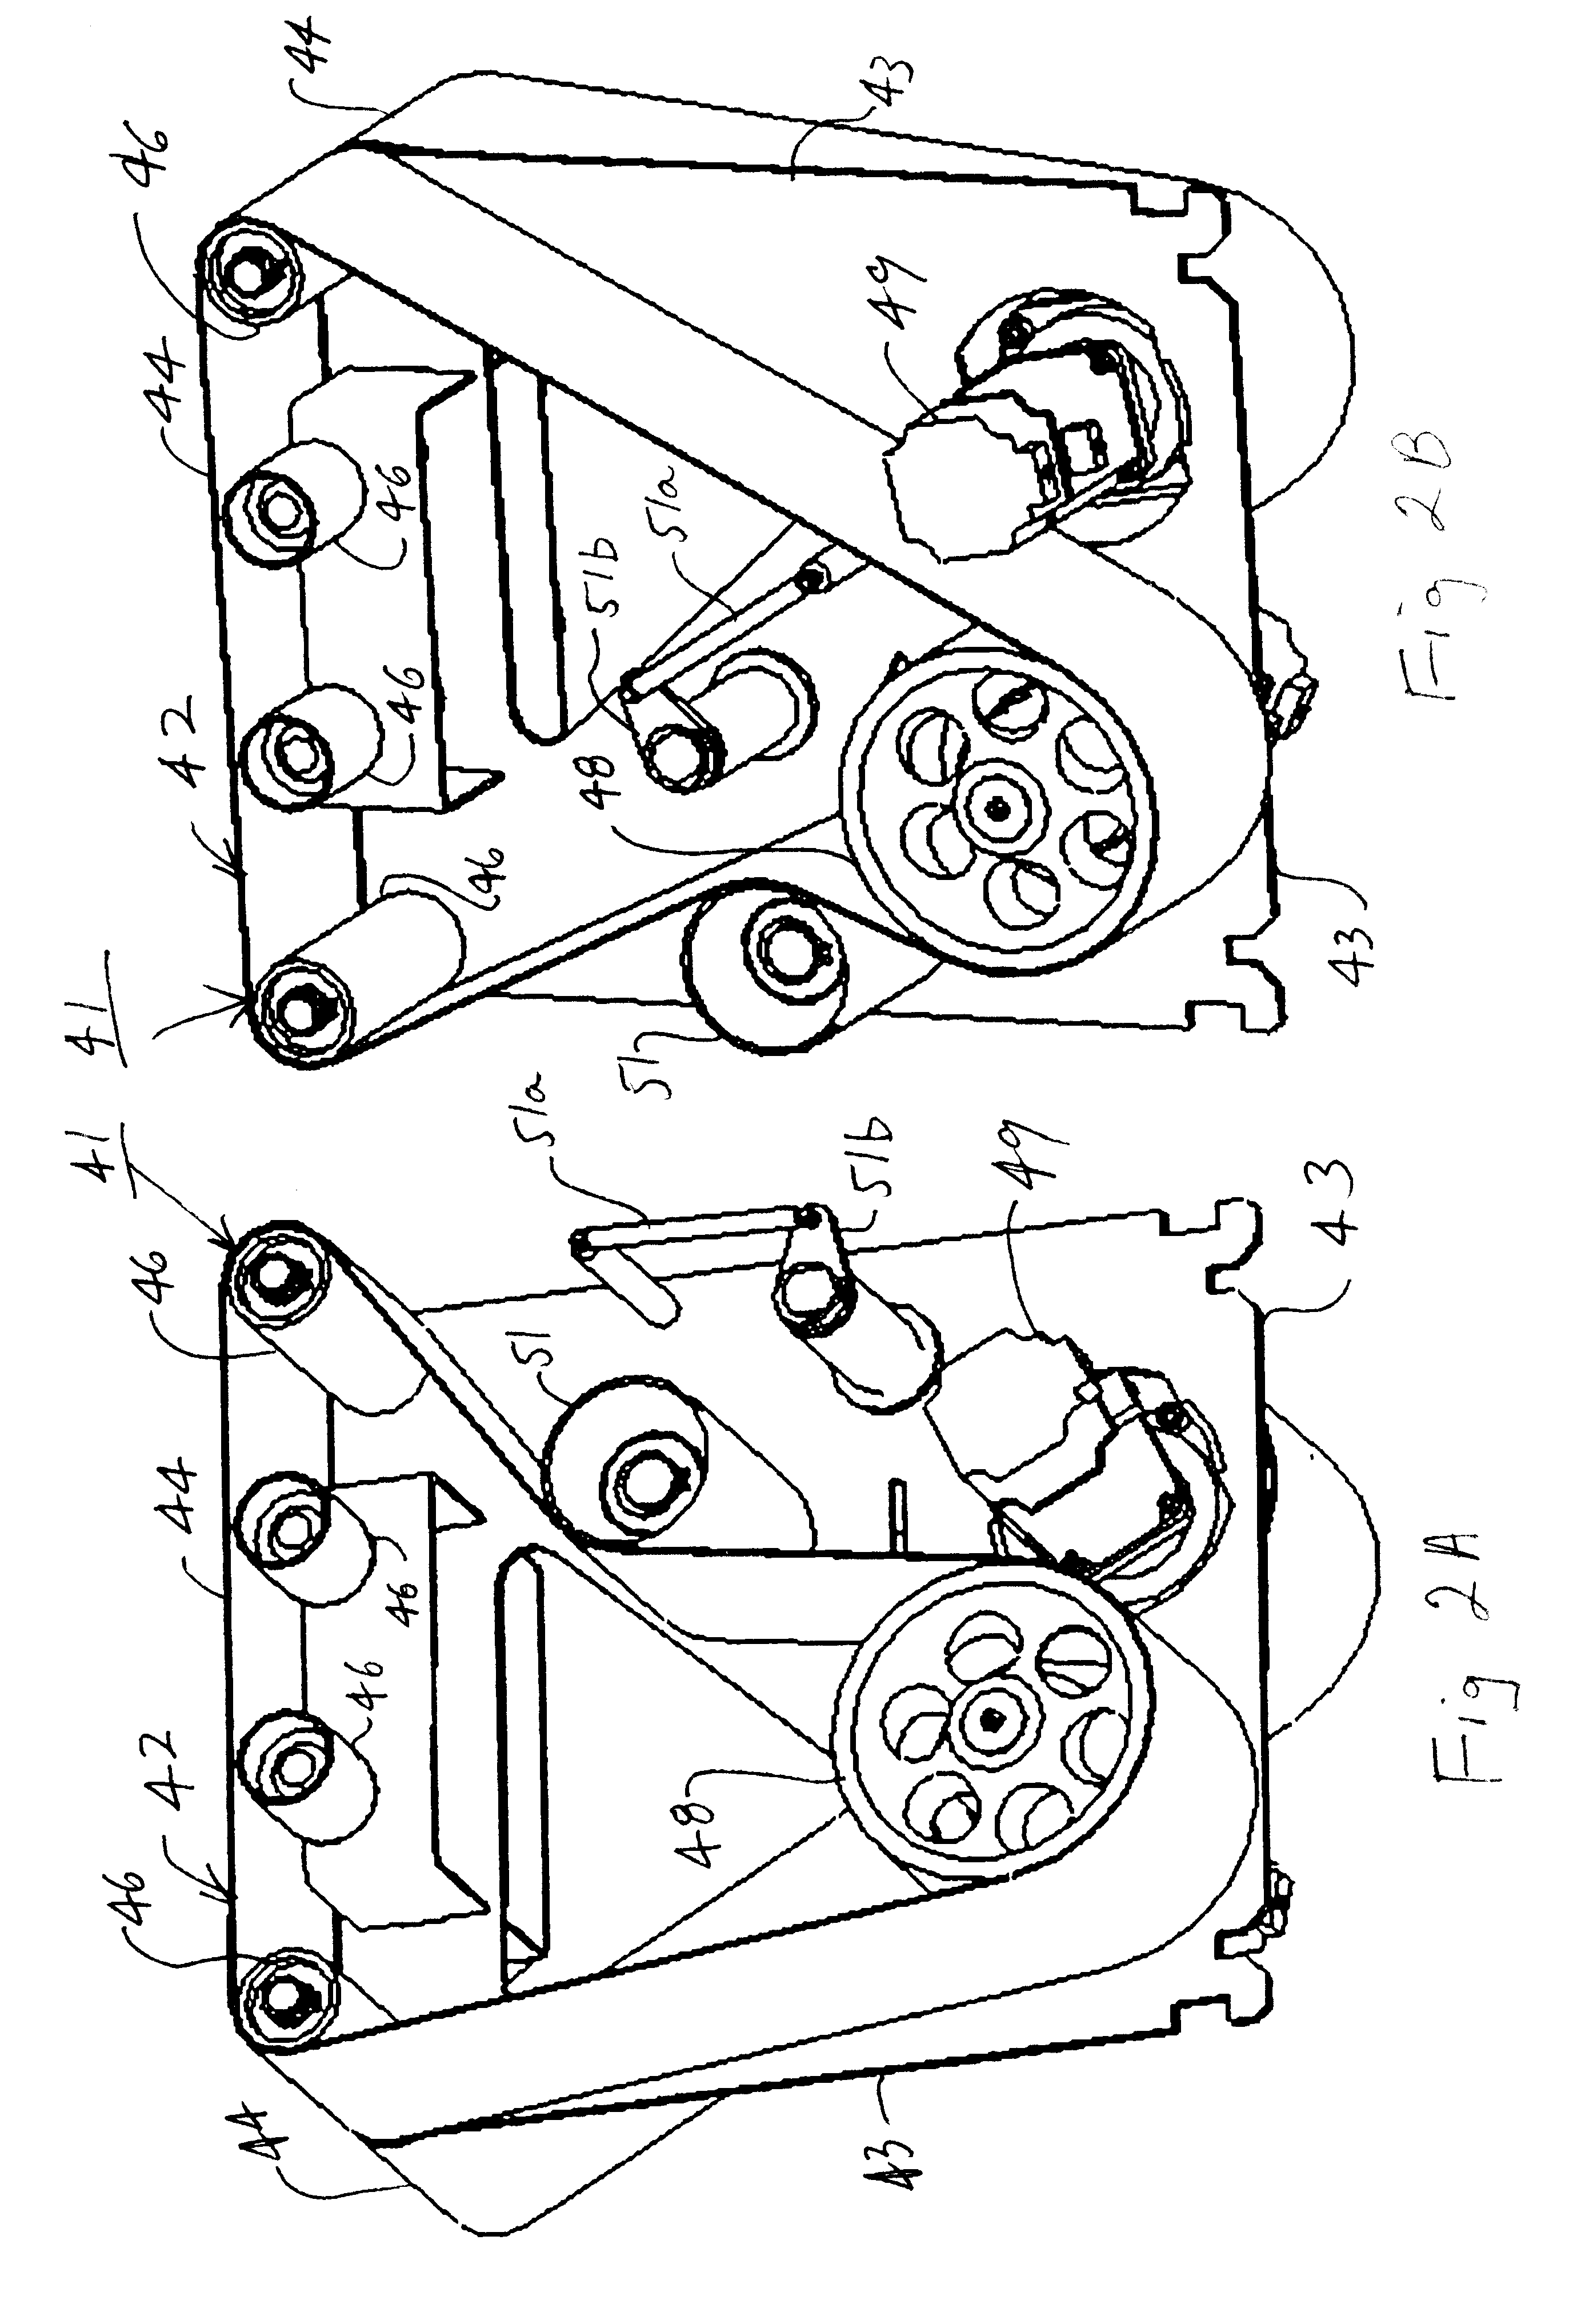 Conveyor system with distributed article manipulation